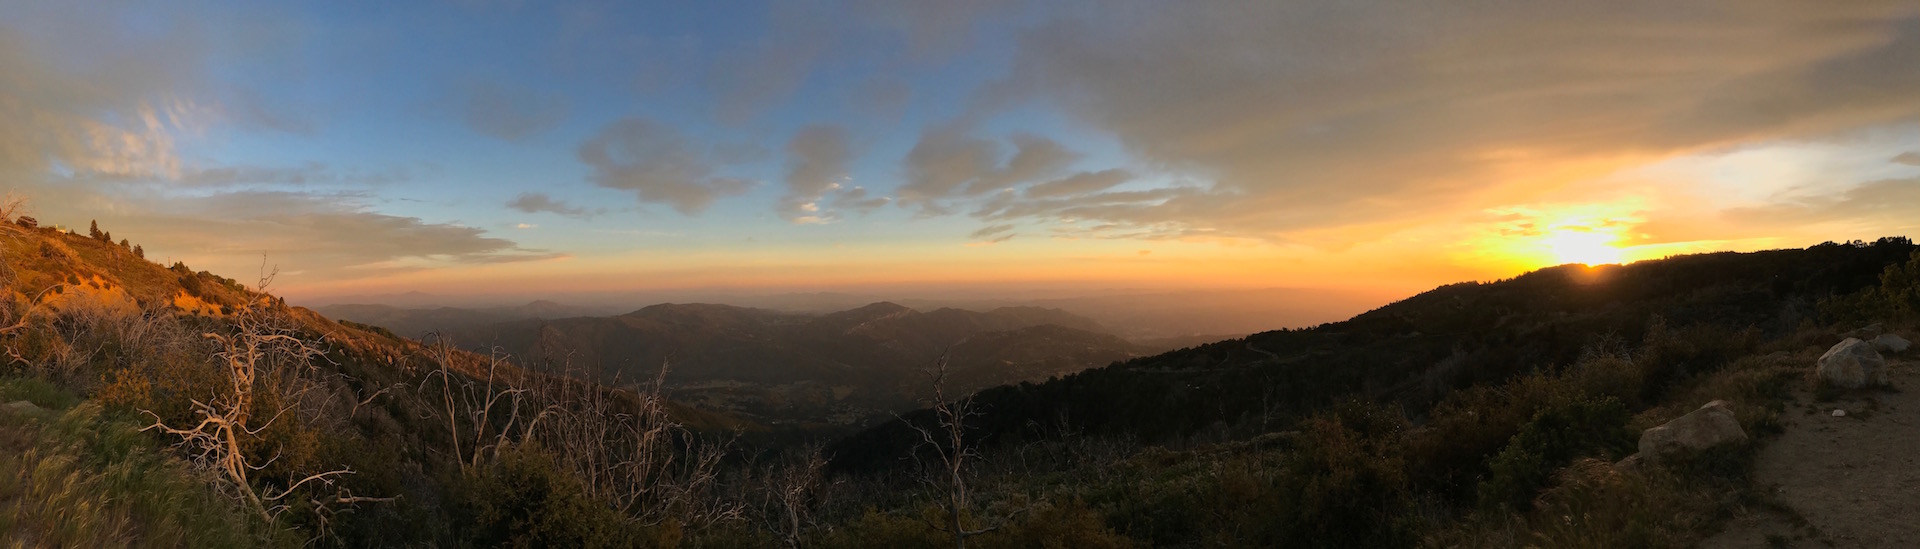 View from Palomar Mountain.jpg